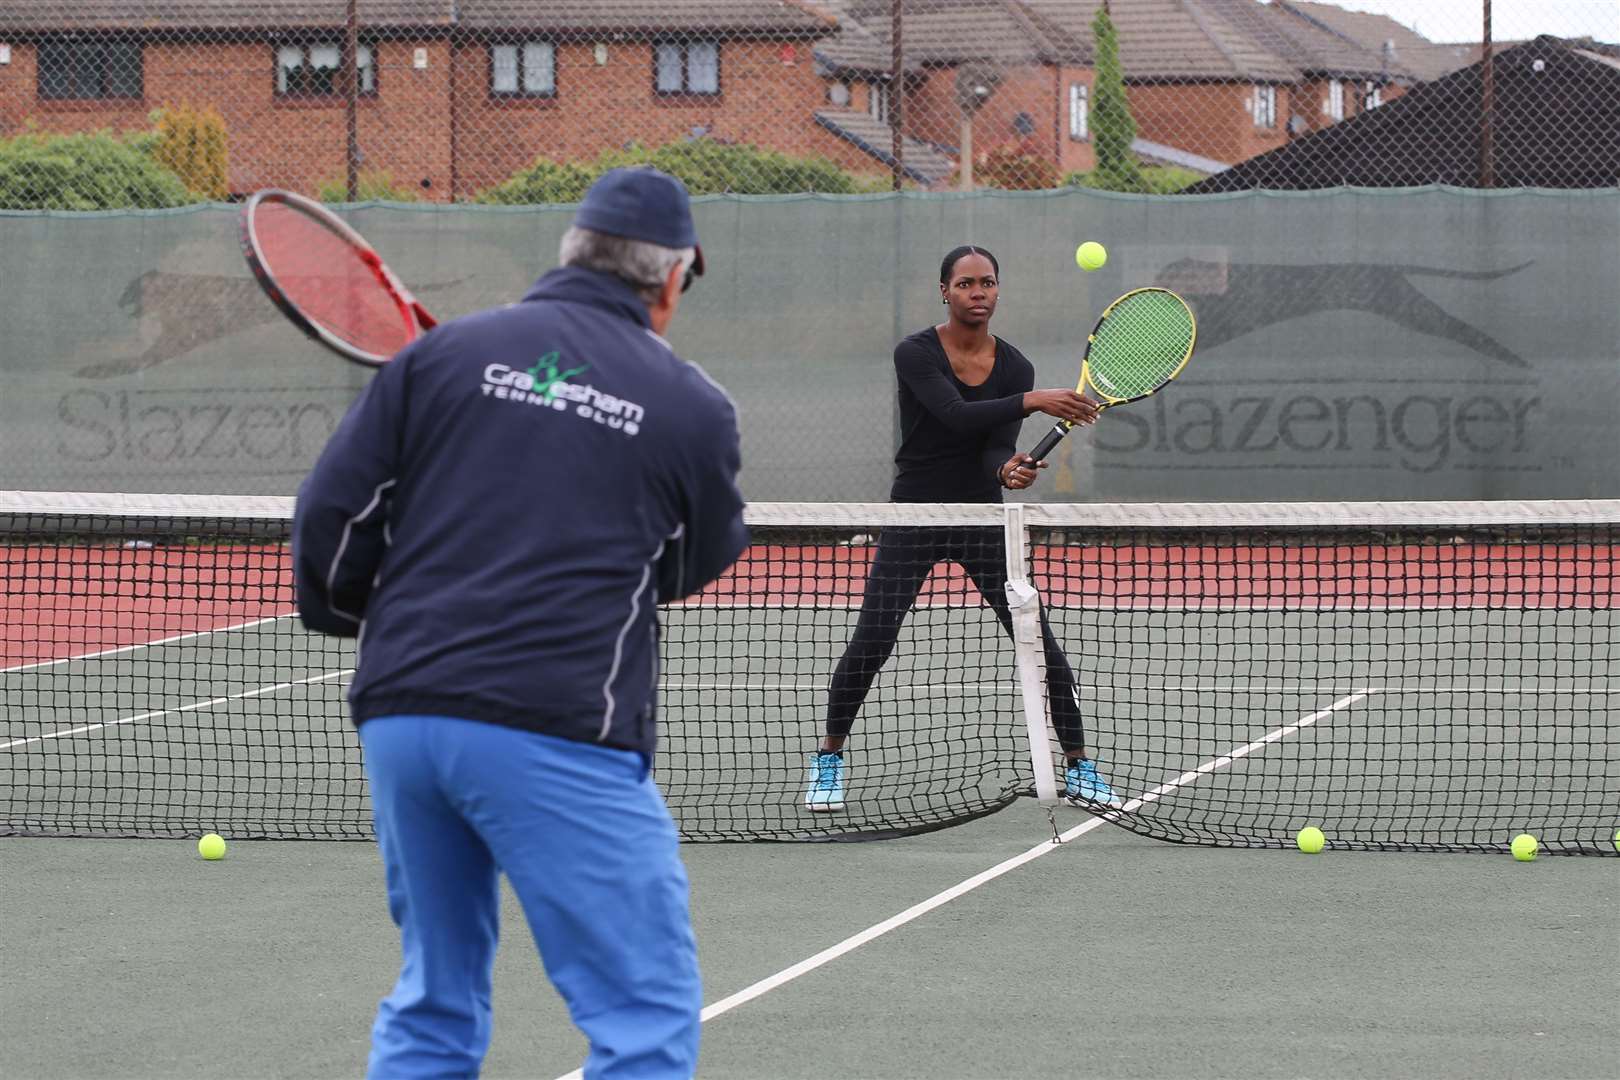 Club member Isabelle Eustache playing with Gravesham Tennis Club's head coach Michel Suleau on Wednesday. Picture: Rob Powell / rob@uretopia.com (34675140)